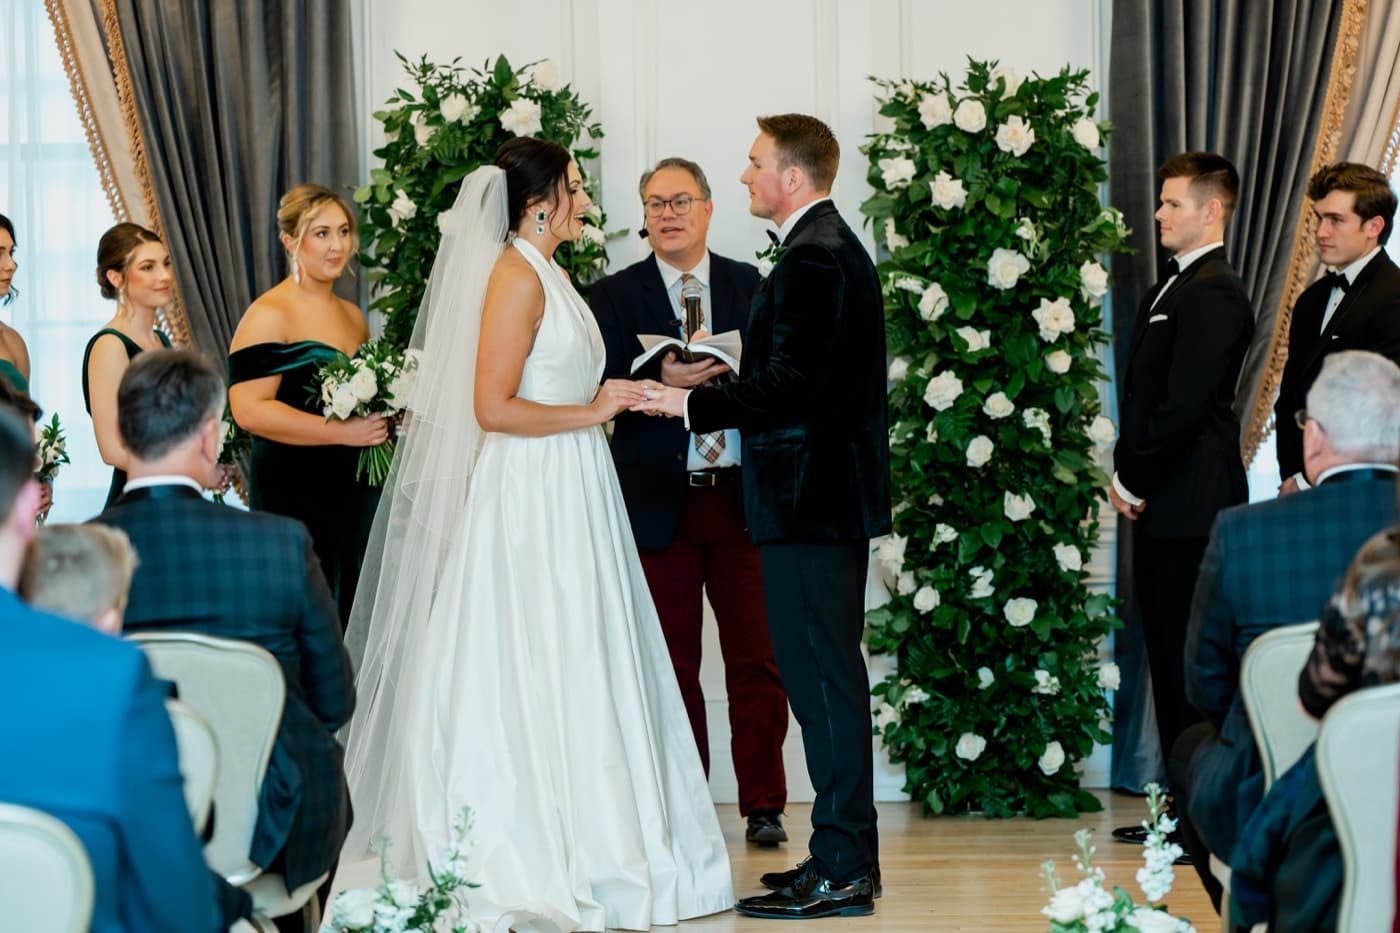 exchanging rings at hotel fort des moines wedding ceremony